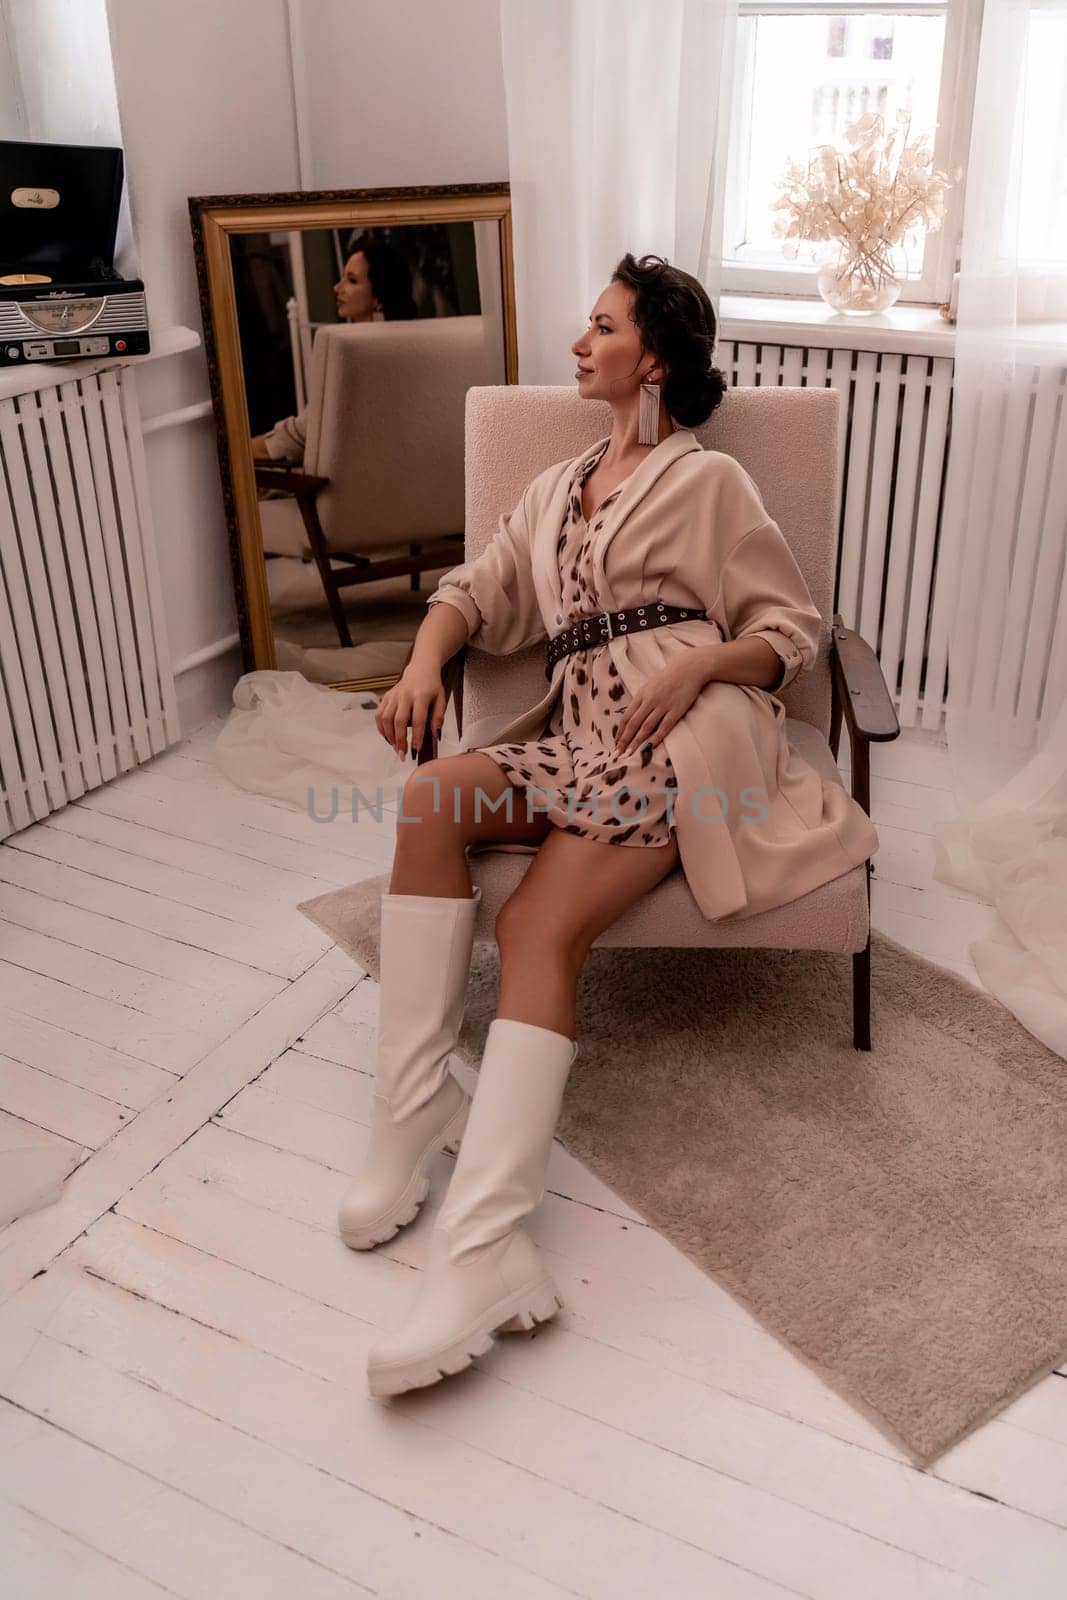 A woman is sitting in a chair wearing a white dress and white boots. She is wearing a brown jacket and a brown belt